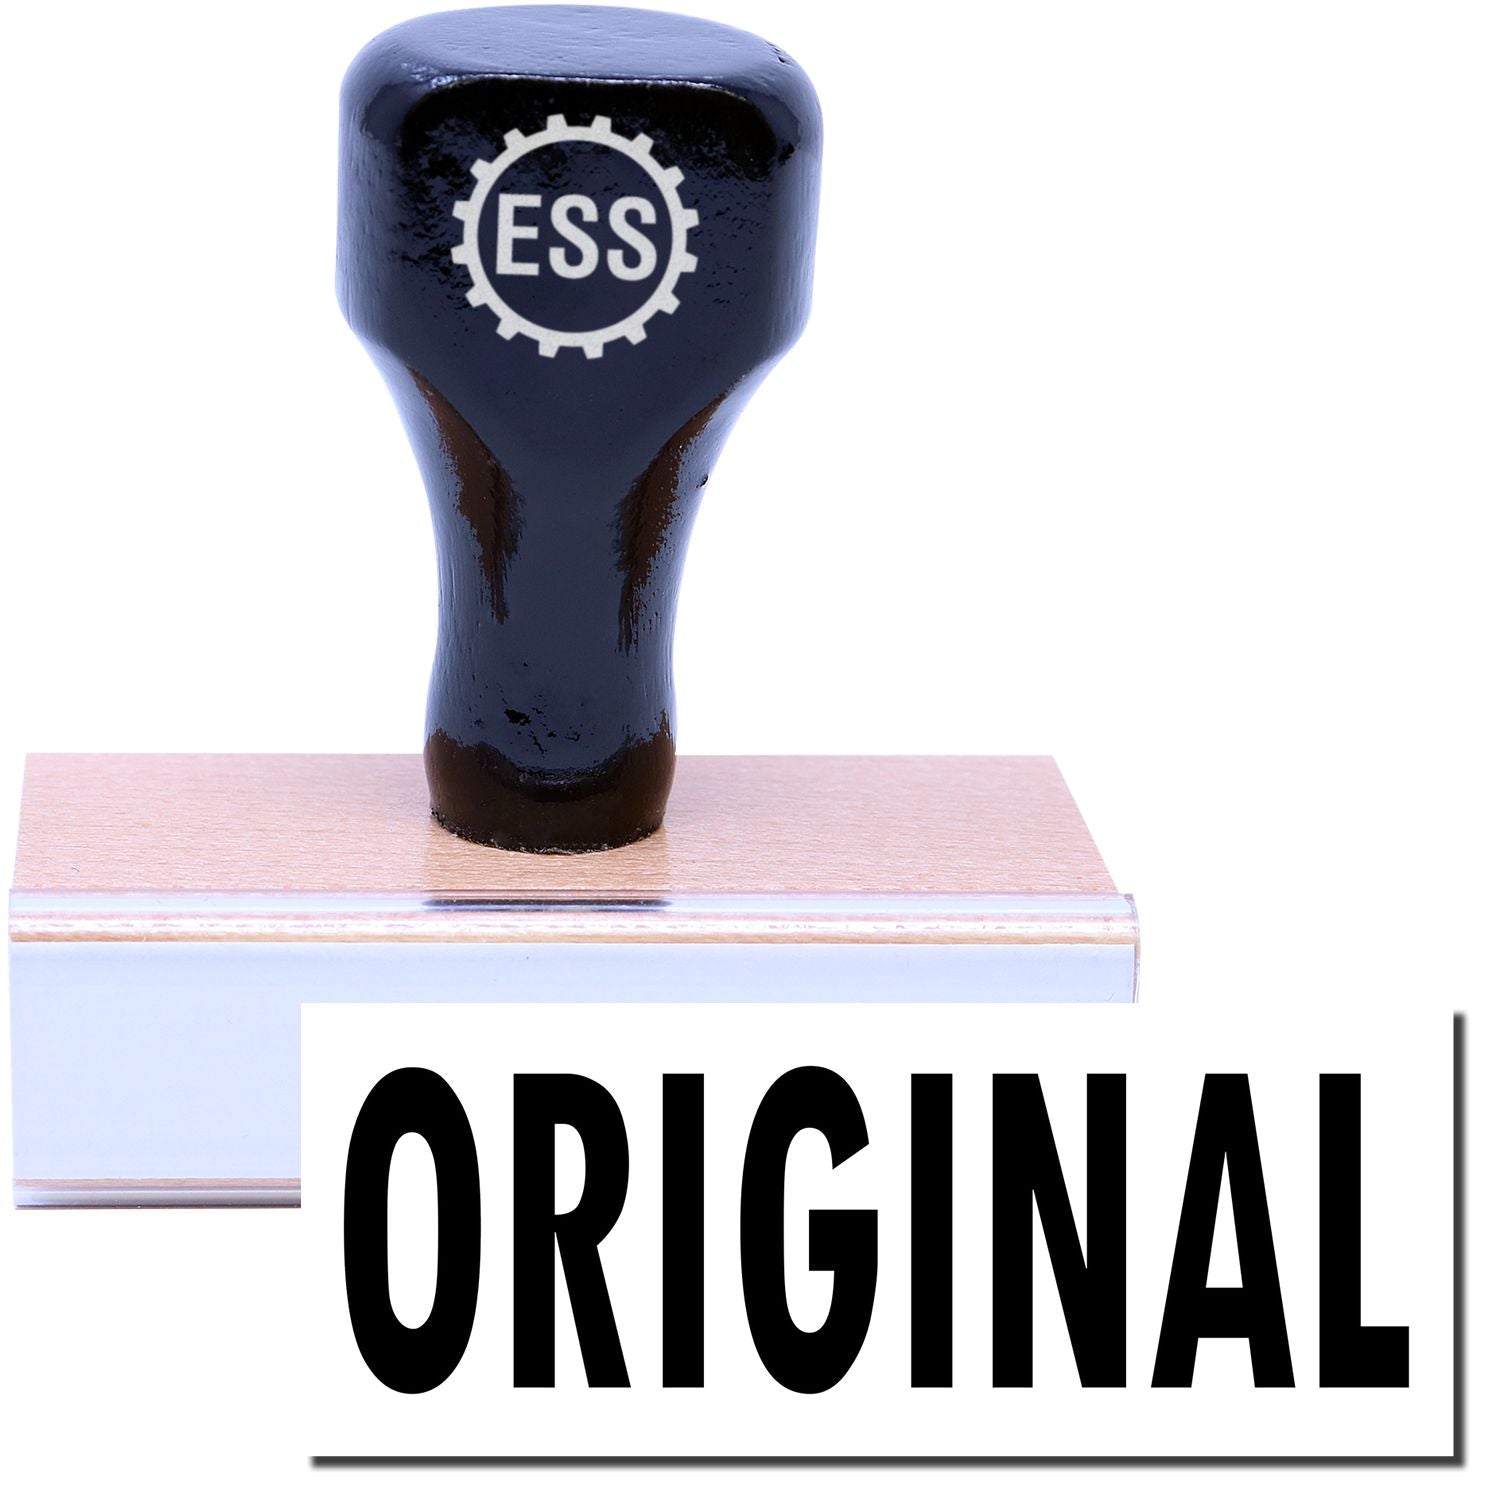 A stock office rubber stamp with a stamped image showing how the text "ORIGINAL" is displayed after stamping.